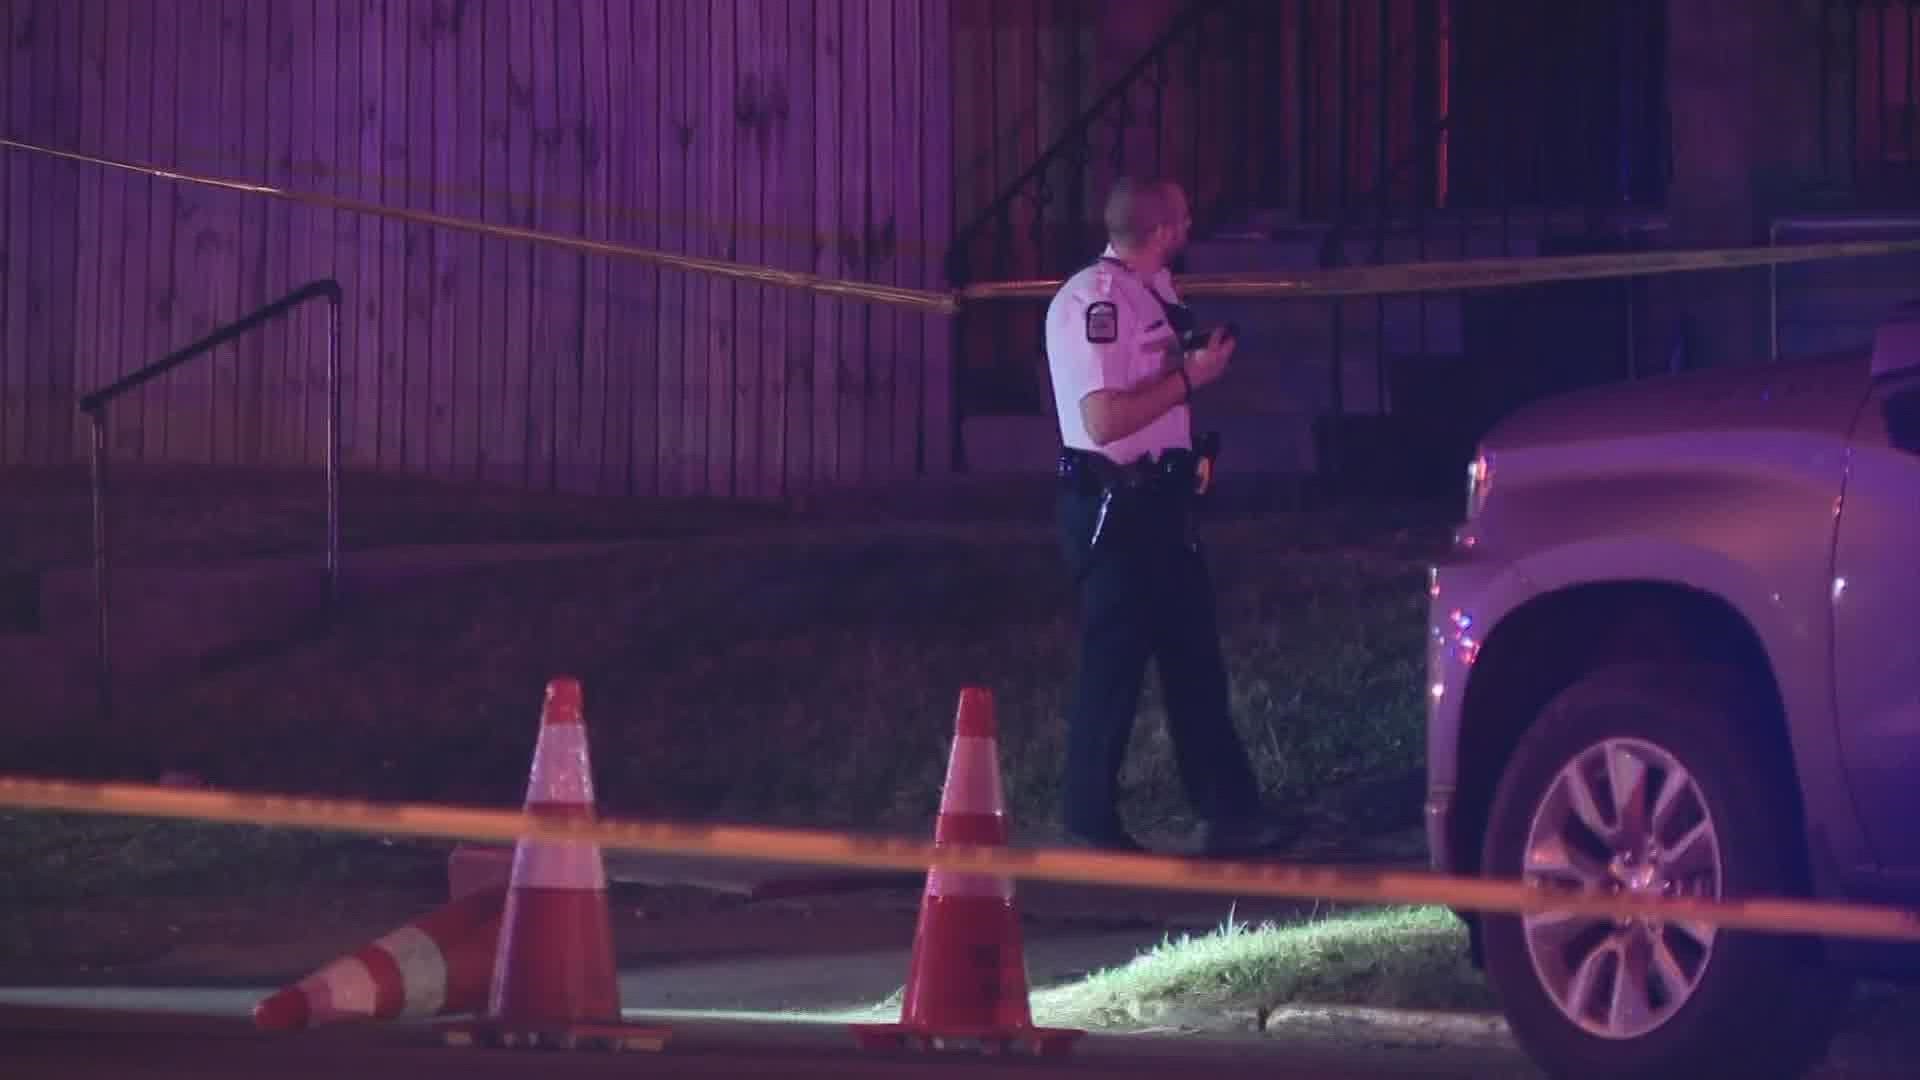 Columbus police are actively looking for a killer following a deadly shooting late Thursday night.